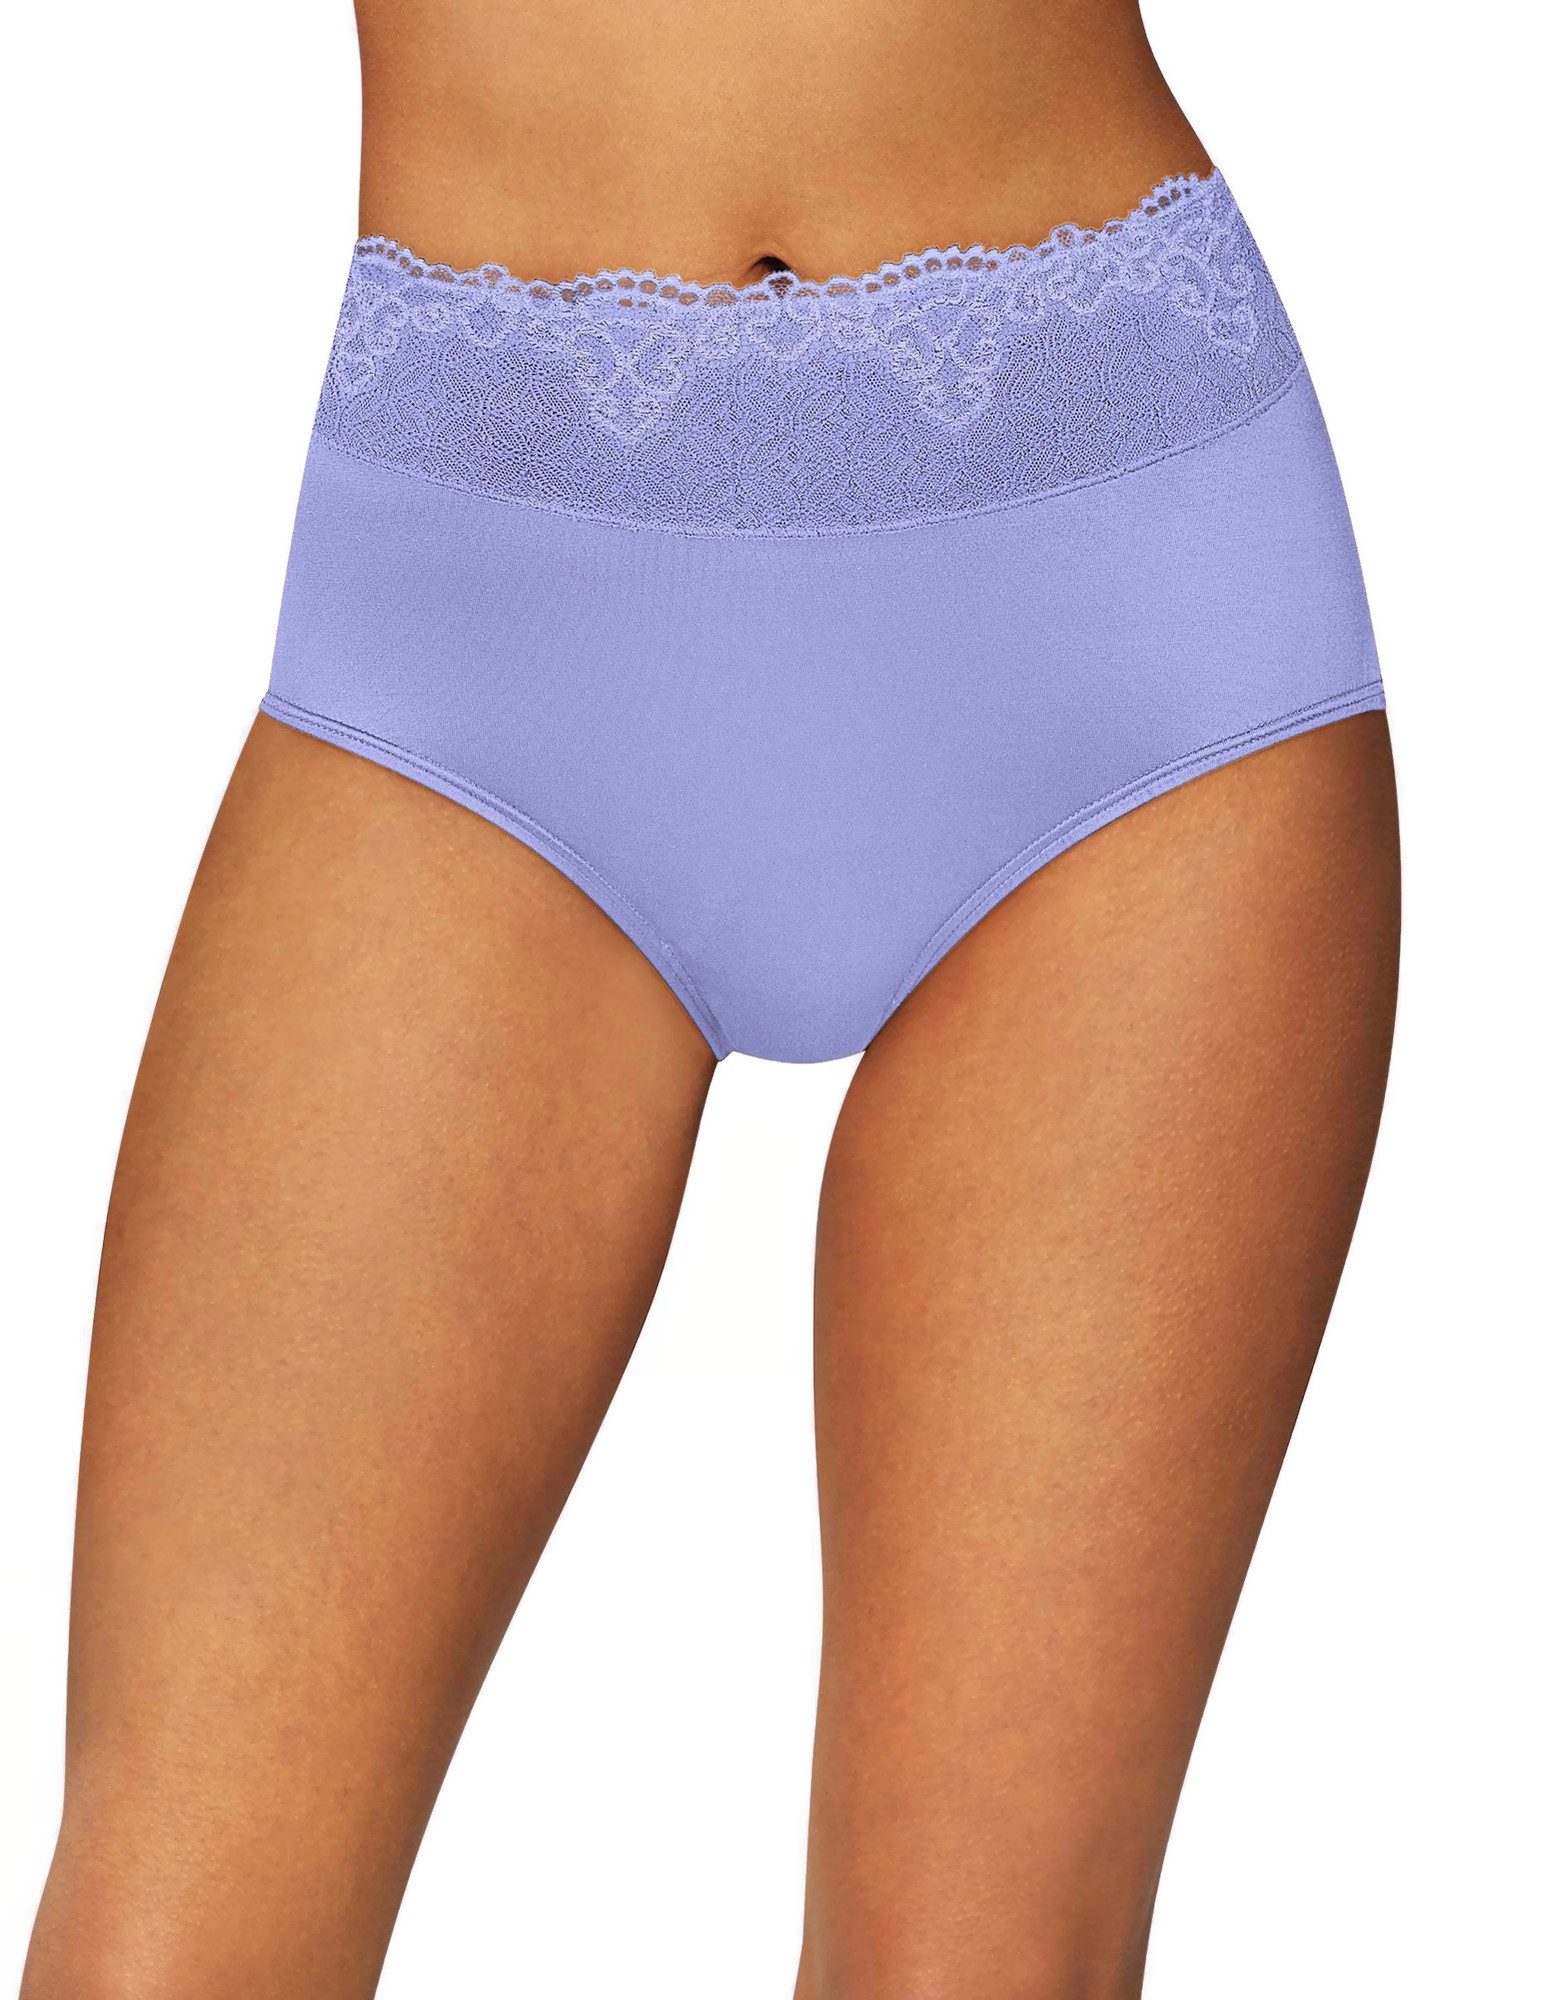 Women's Bali Passion for Comfort Lace & Tailored Brief Panty 